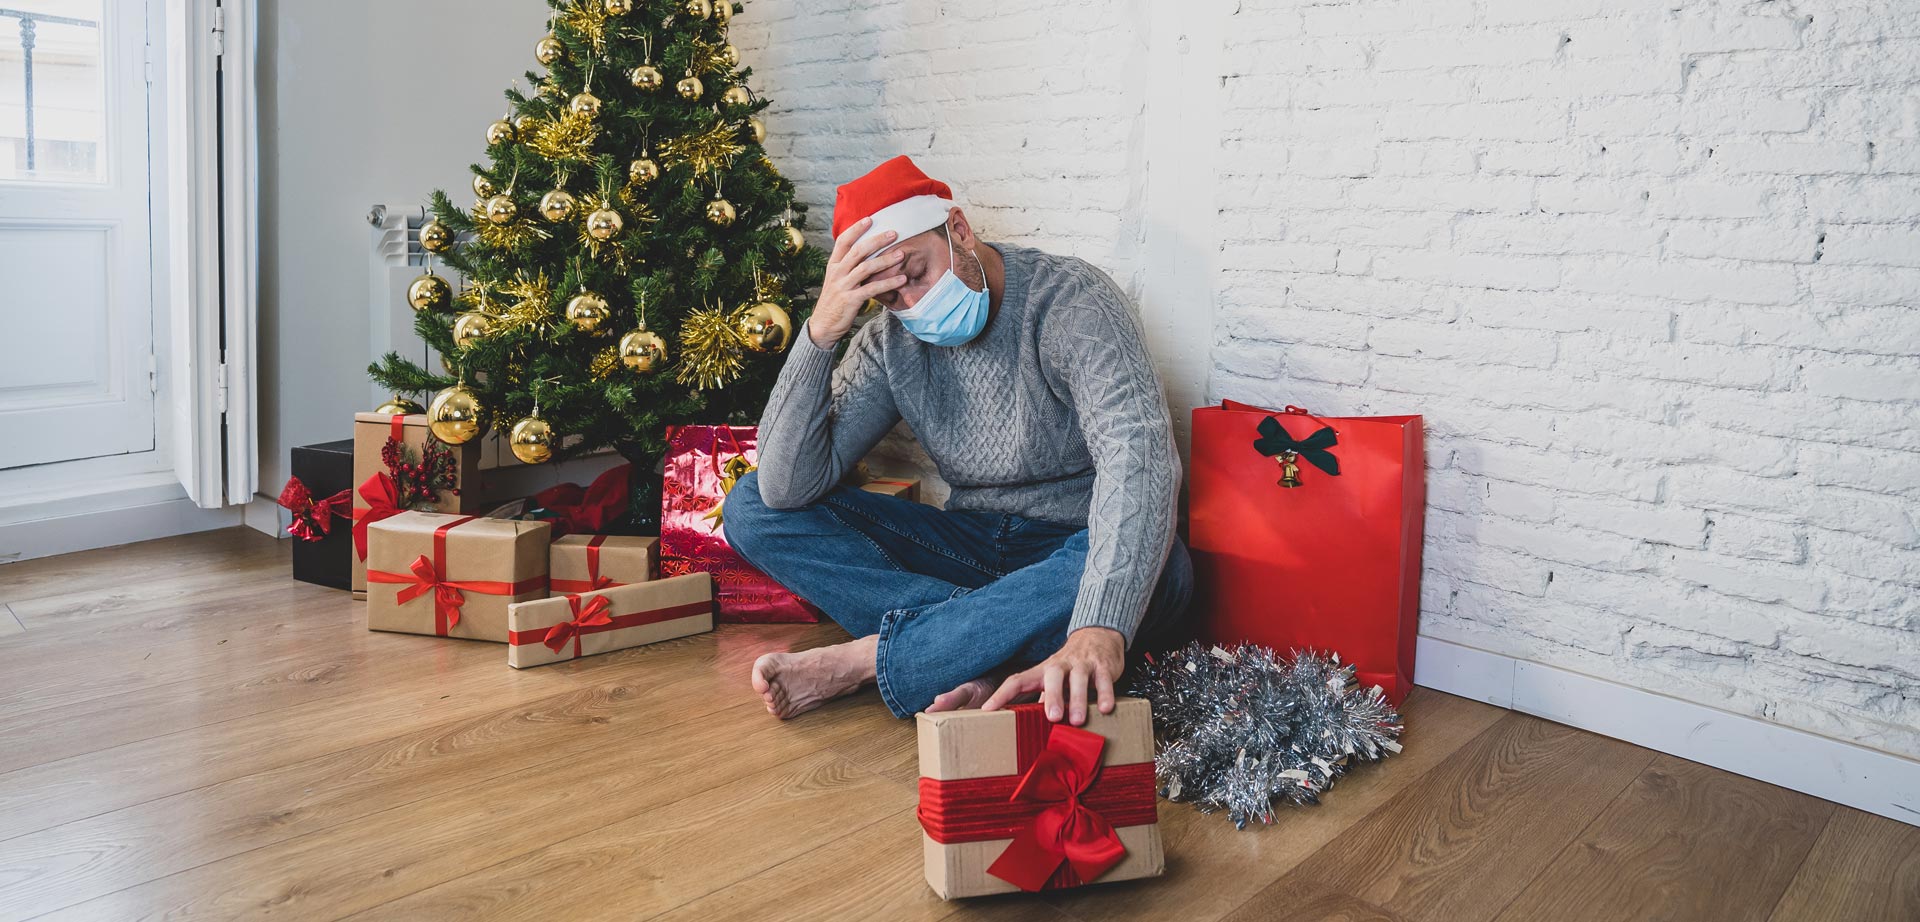 Five Ways to Look after Your Mental Health this Christmas and New Year